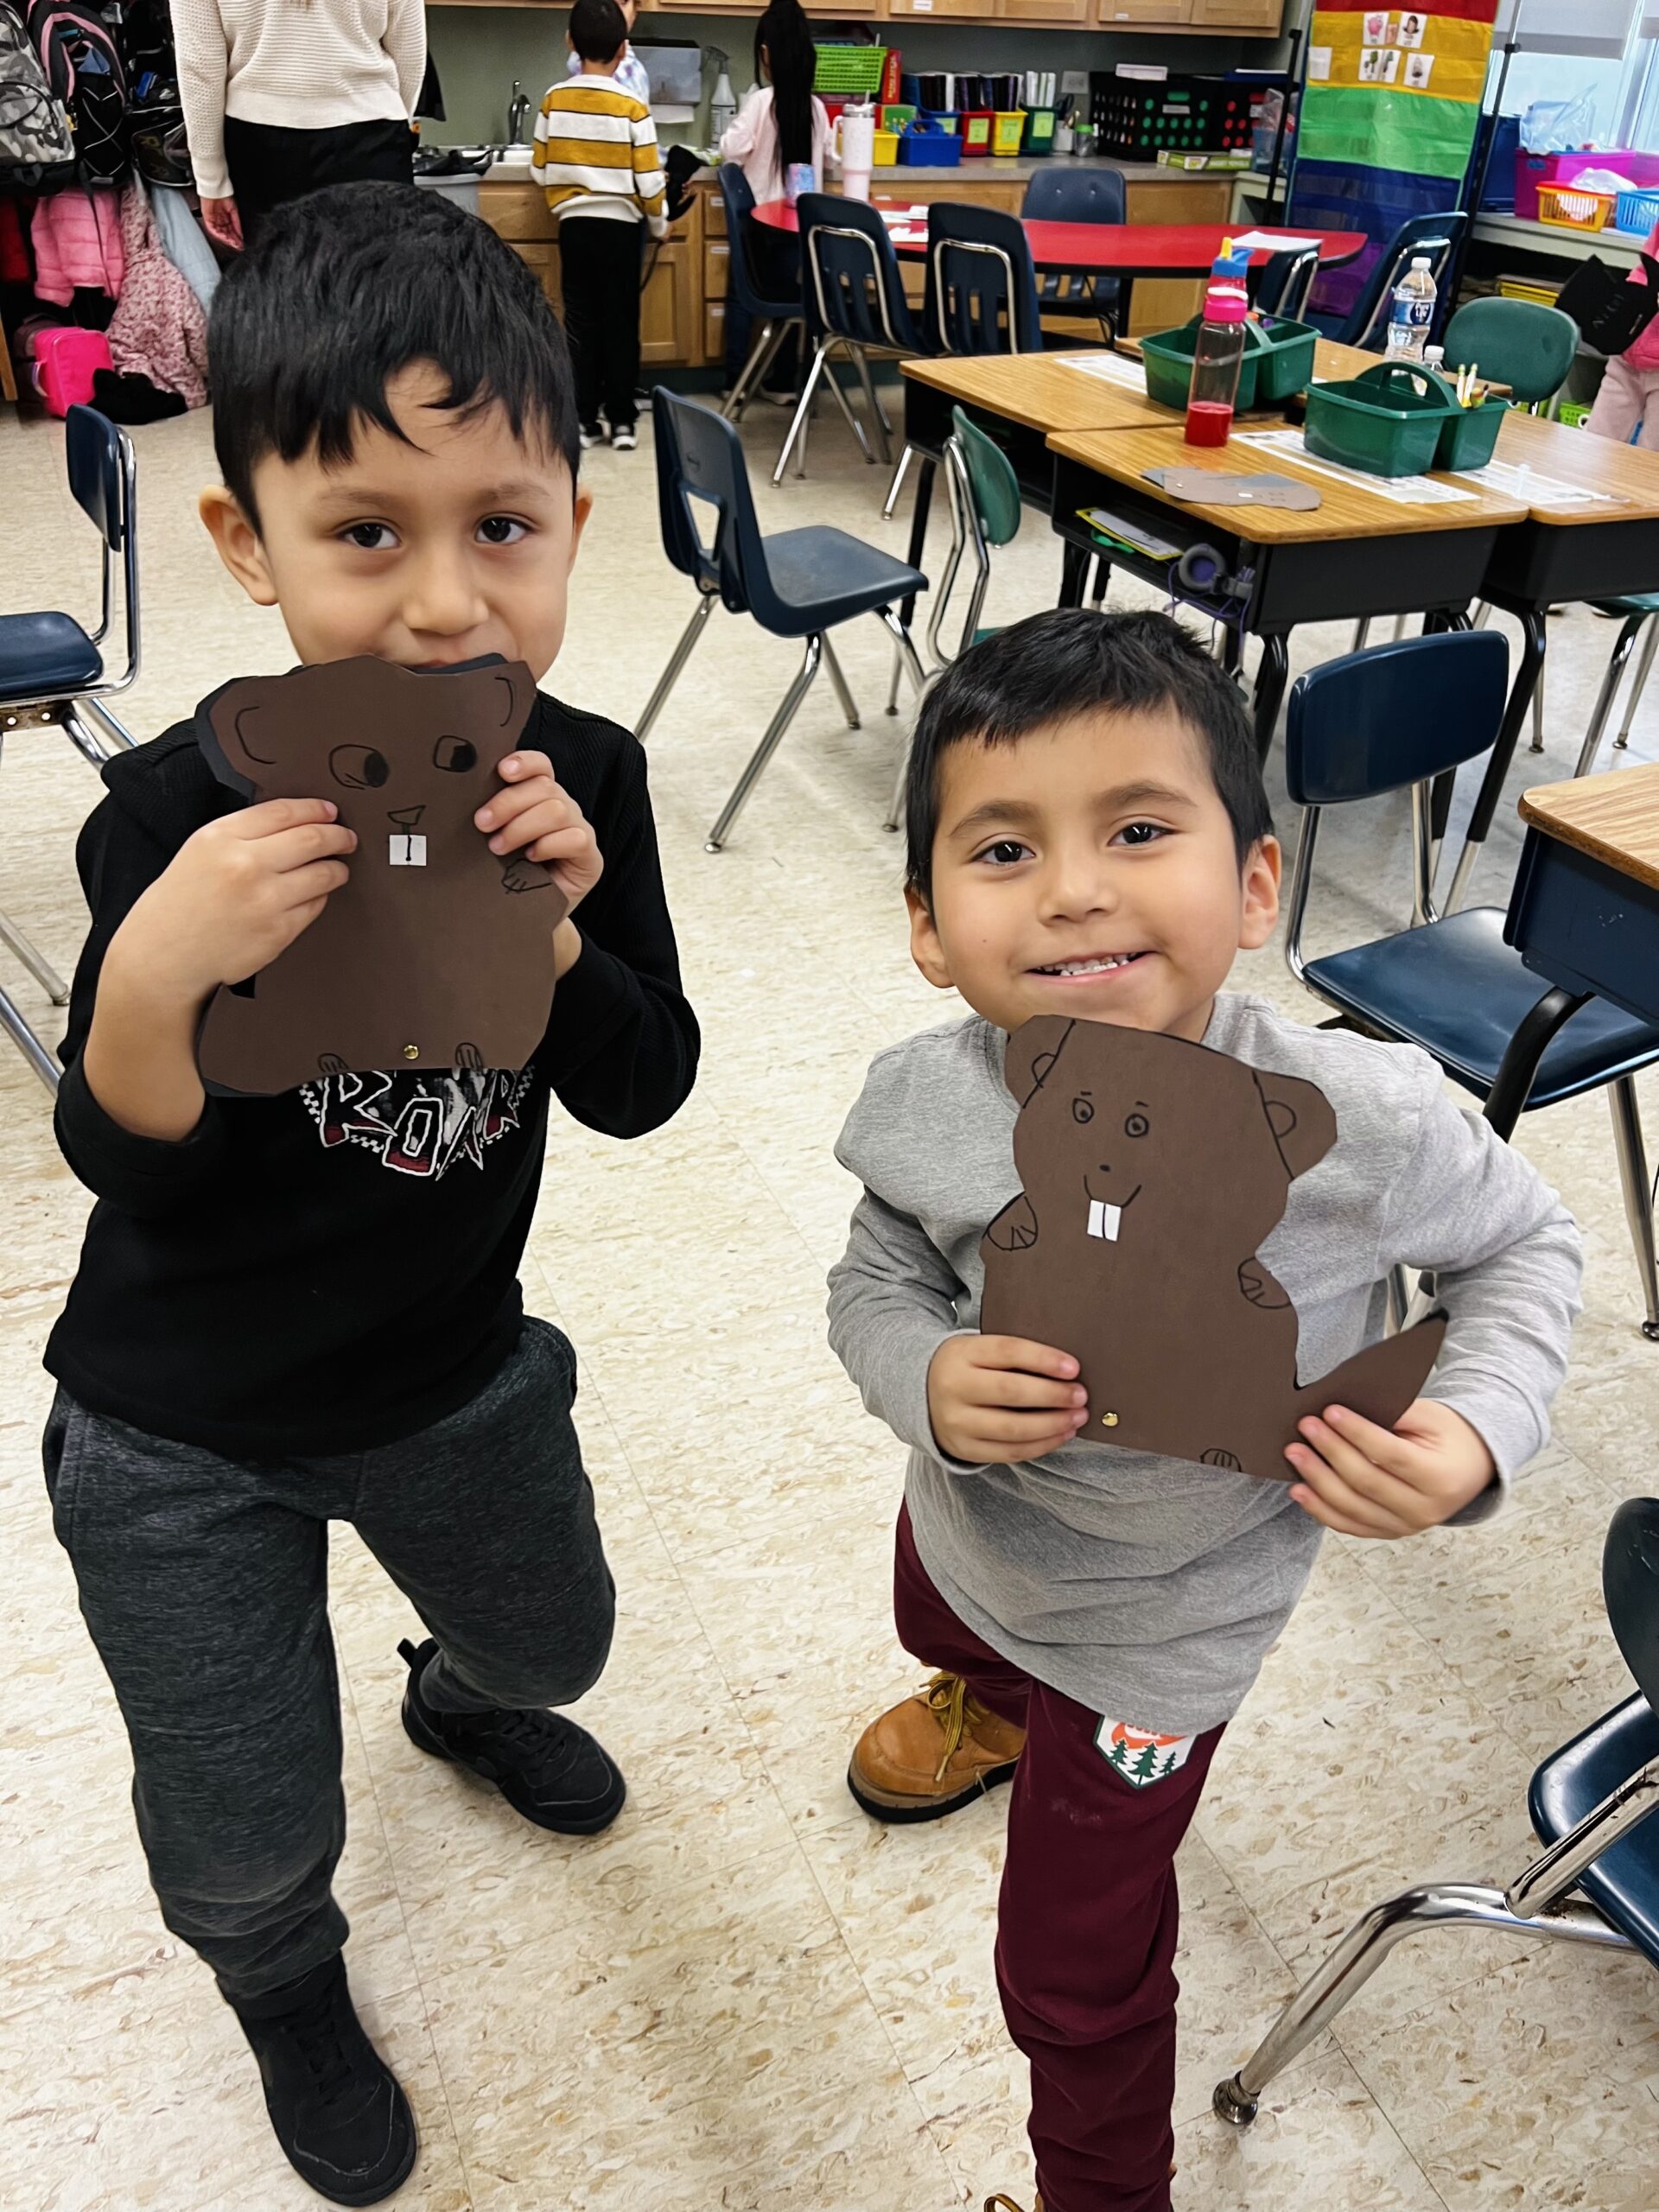 In observance of Groundhog Day, Hampton Bays Elementary School first grade students in Krista Savino’s class, including Matias Chimbo, left,  and Giancarlos Gomez. watched Punxsutawney Phil make his 2023 weather prediction and then made their own paper groundhogs with shadows. They also made predictions the day before Groundhog Day and designed a bar graph to chart them. COURTESY HAMPTON BAYS SCHOOL DISTRICT